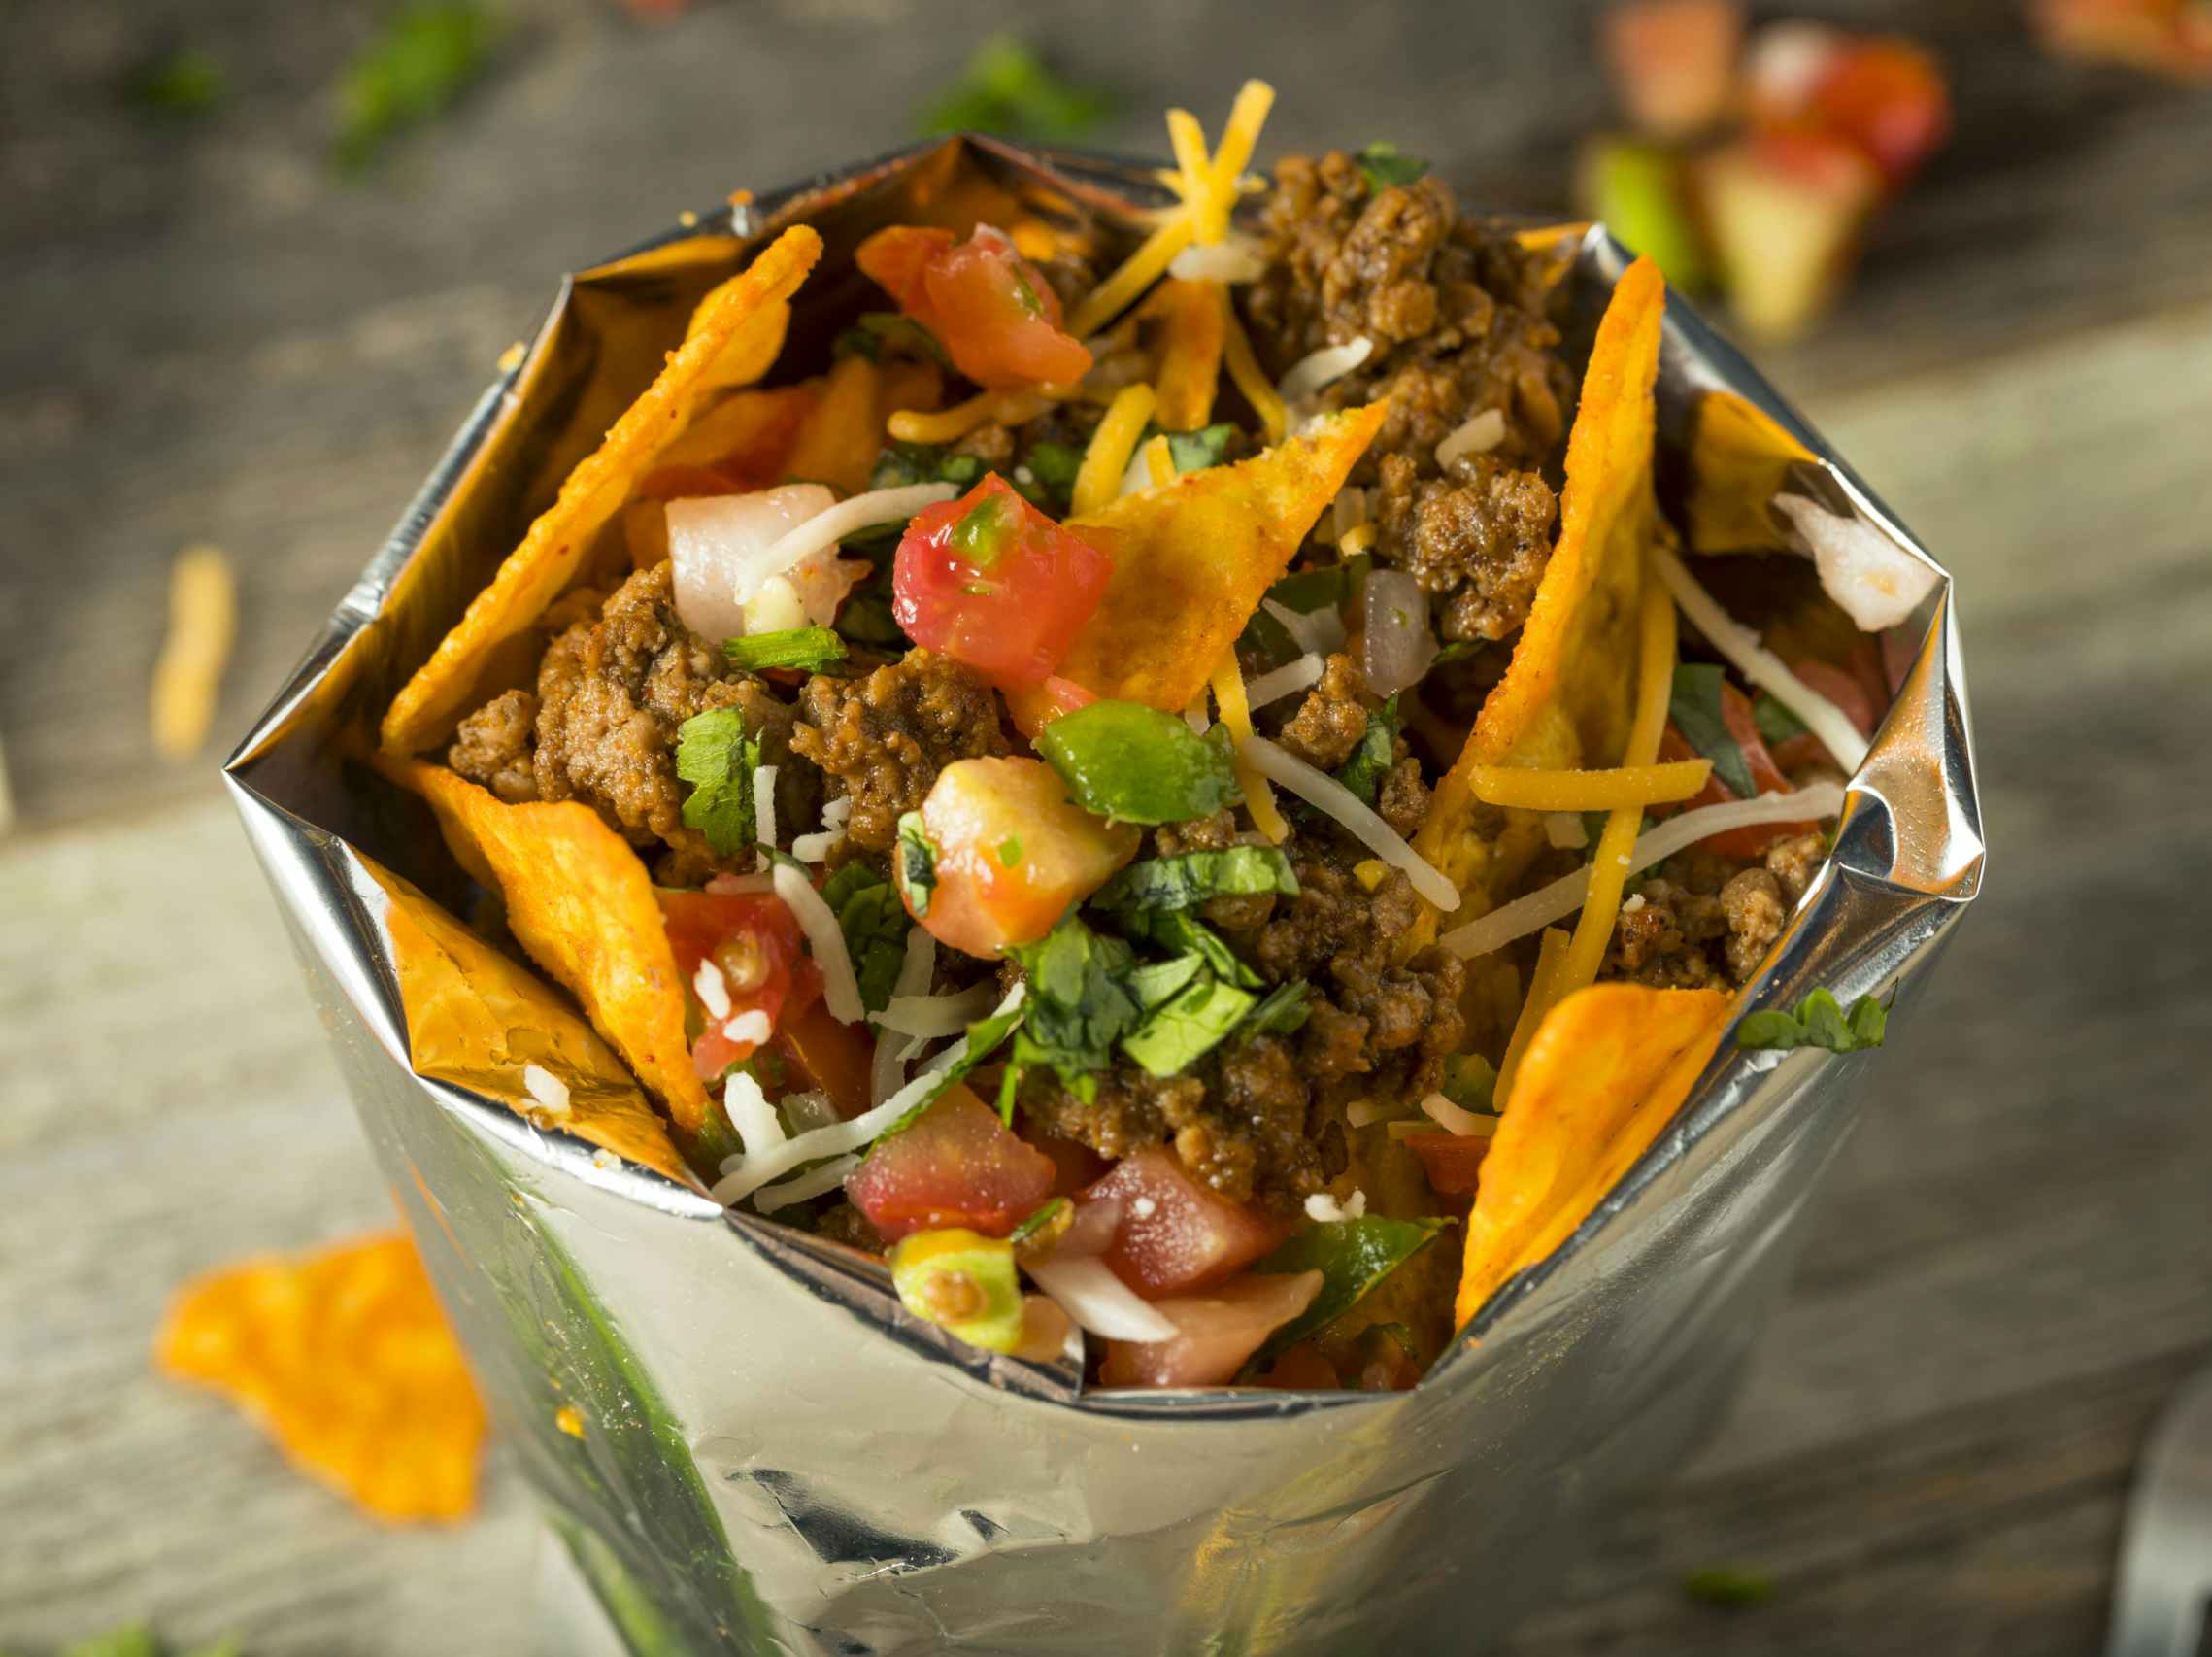 Taco ingredients in a bag with chips